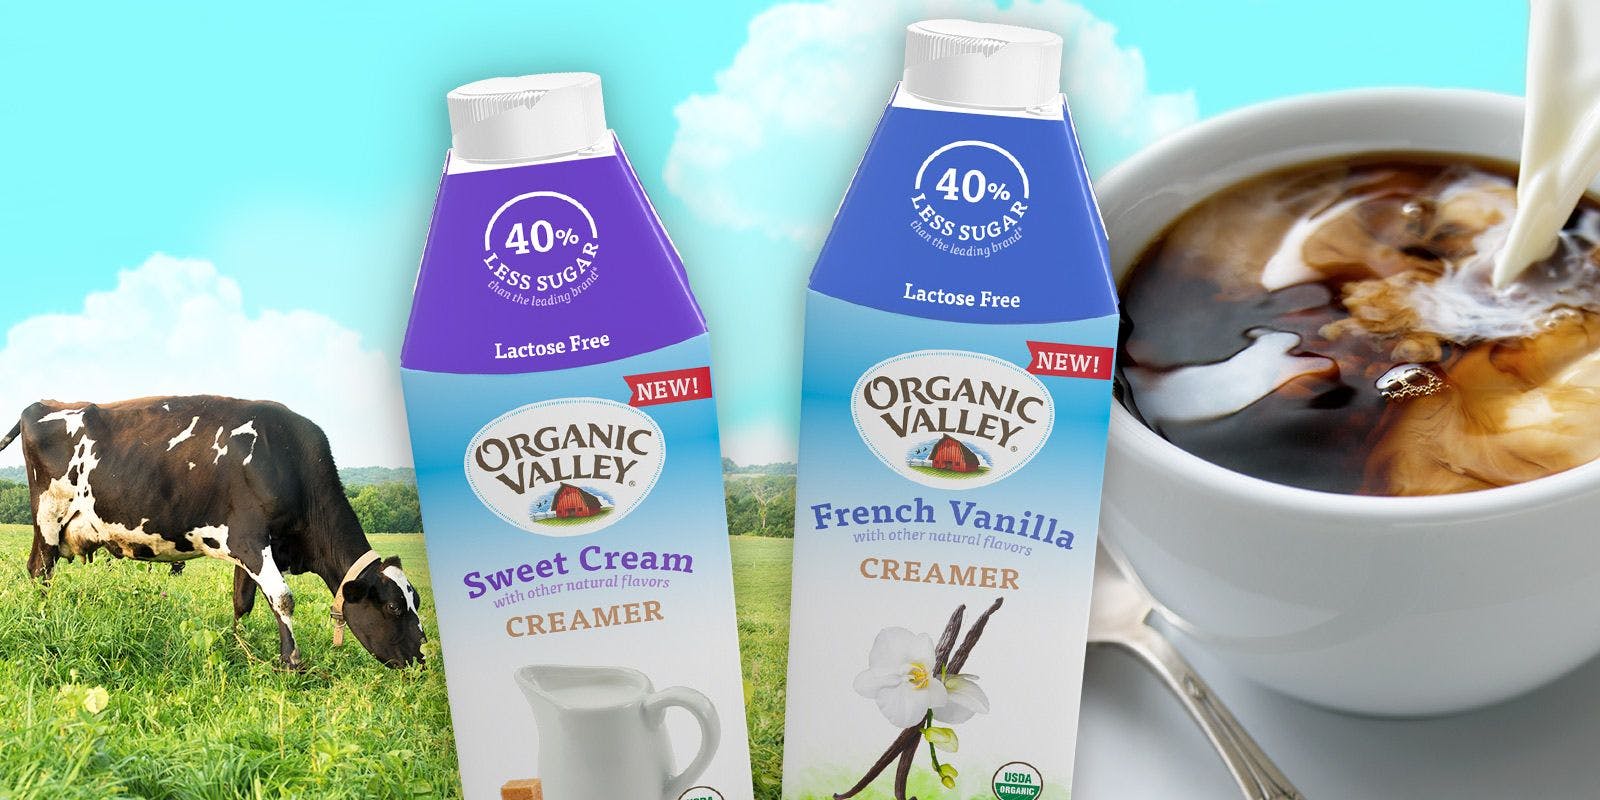 New Organic Valley lactose-free creamers.